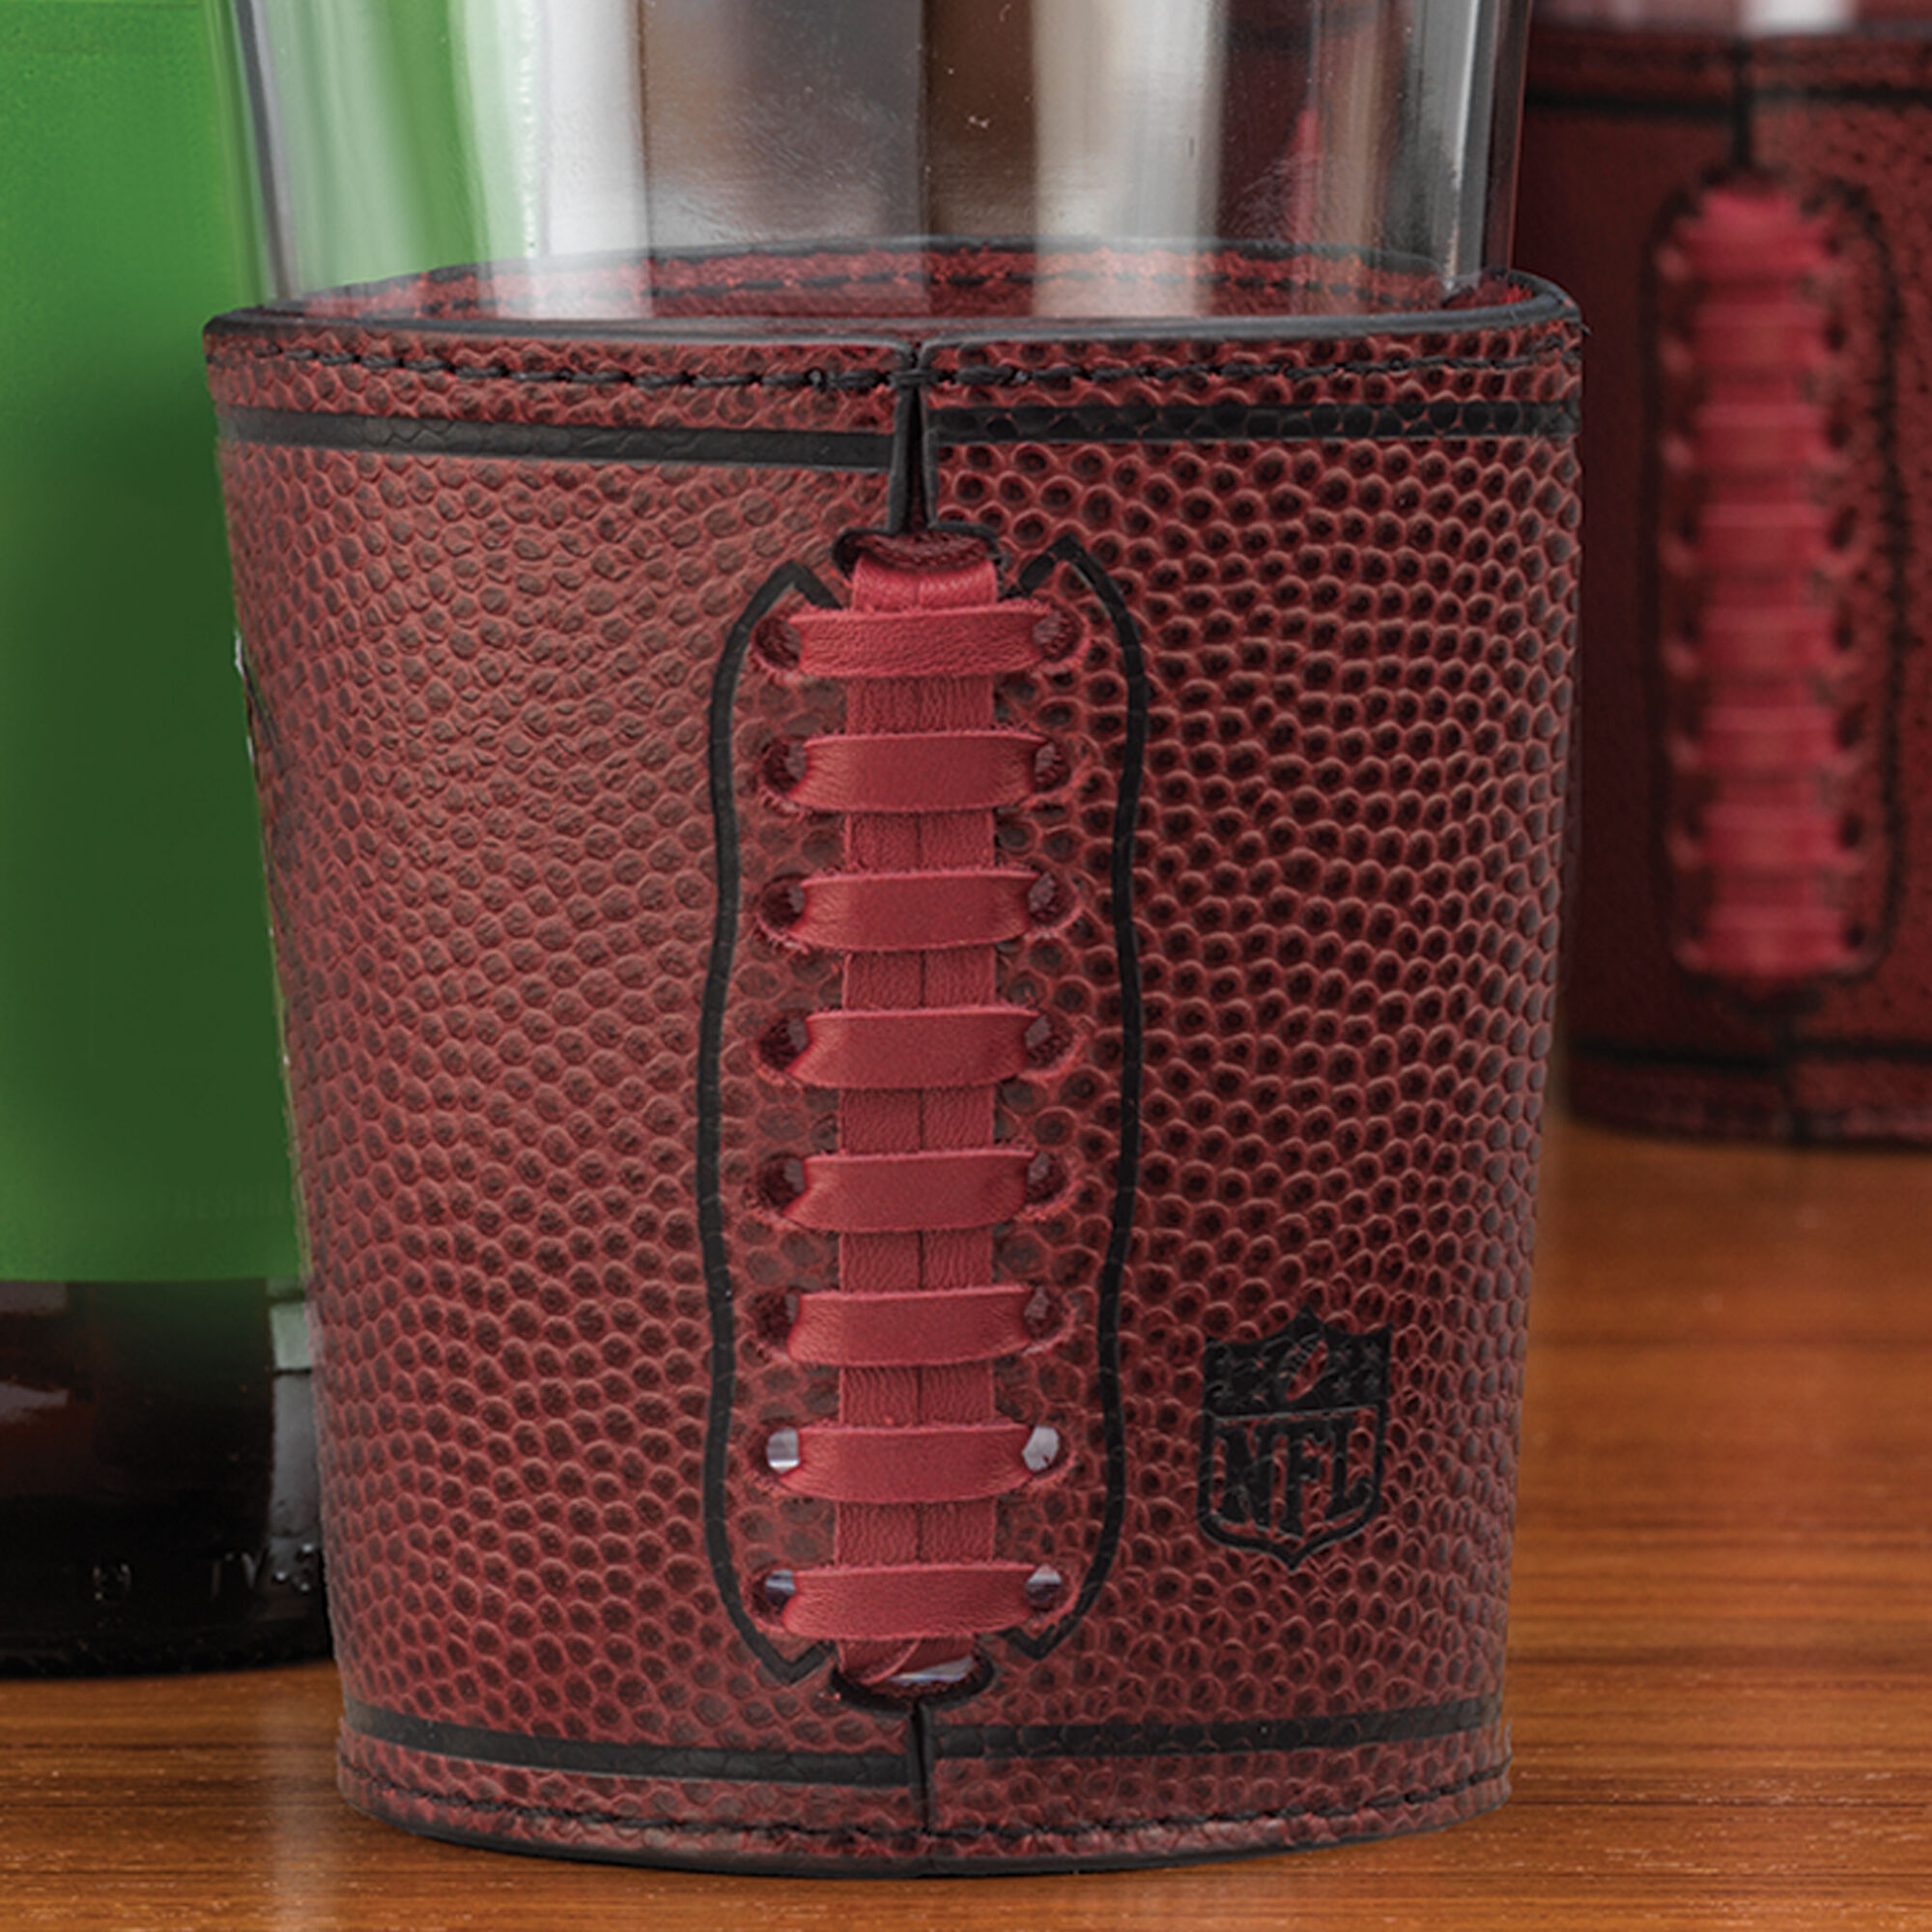 Cowboys Leather Wrapped Pint Glasses 6127 0013 b detailsshot